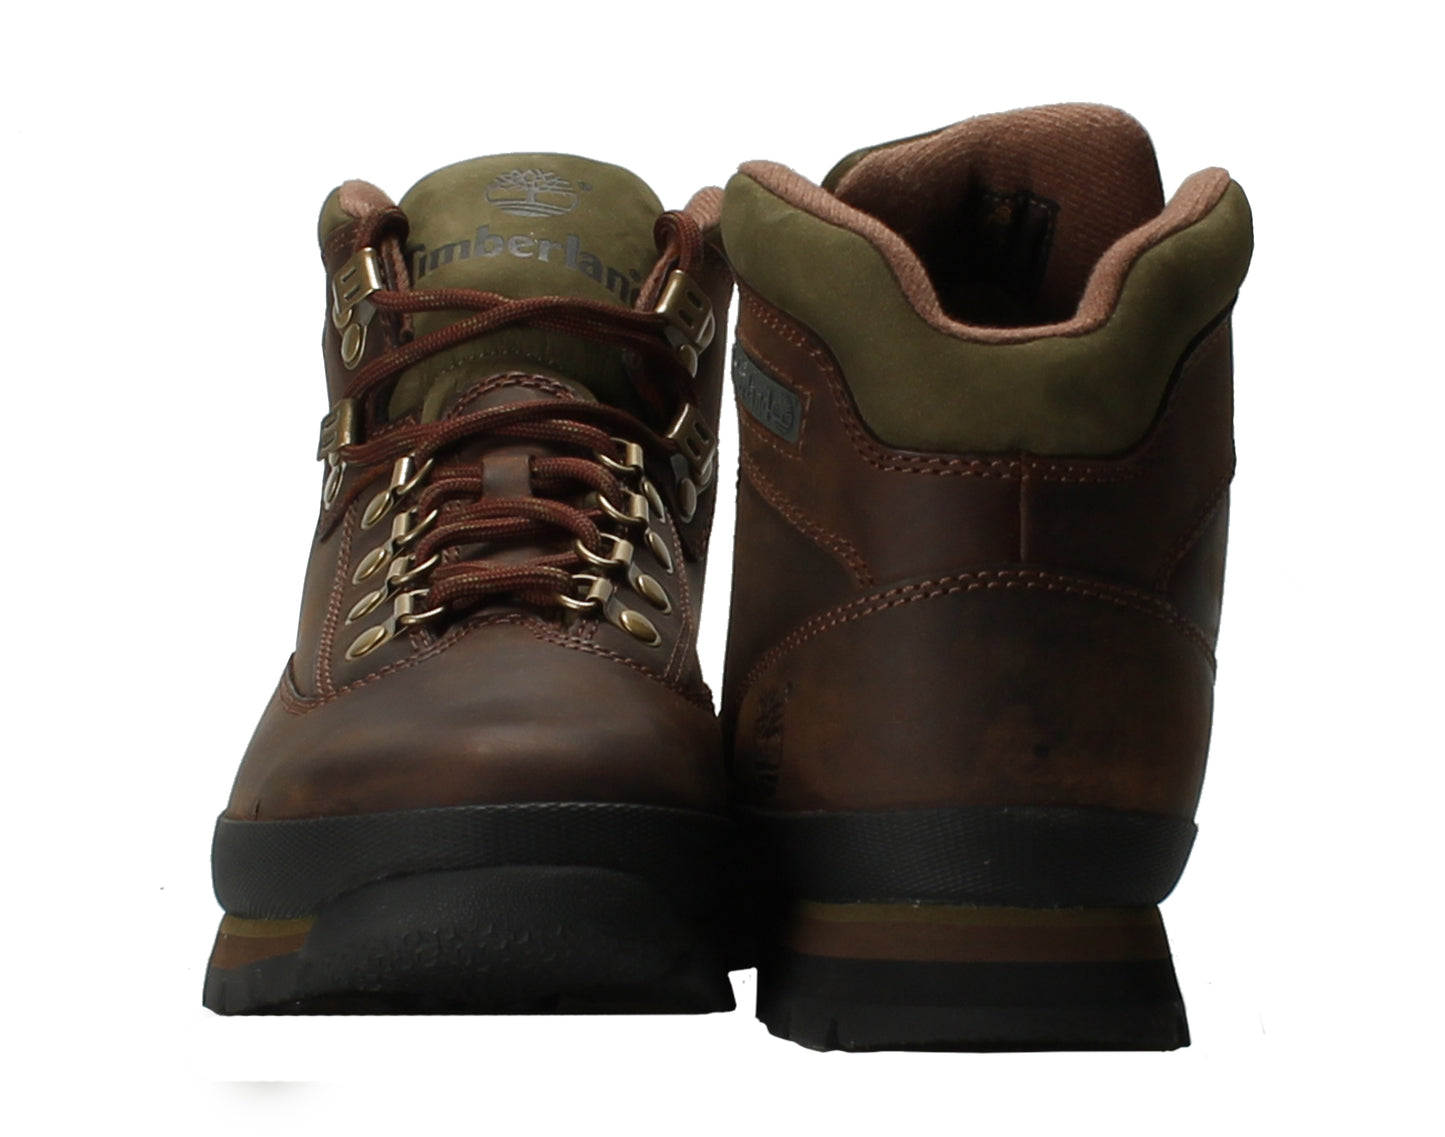 Timberland Euro Hiker Oiled Leather Men's Hiking Boots